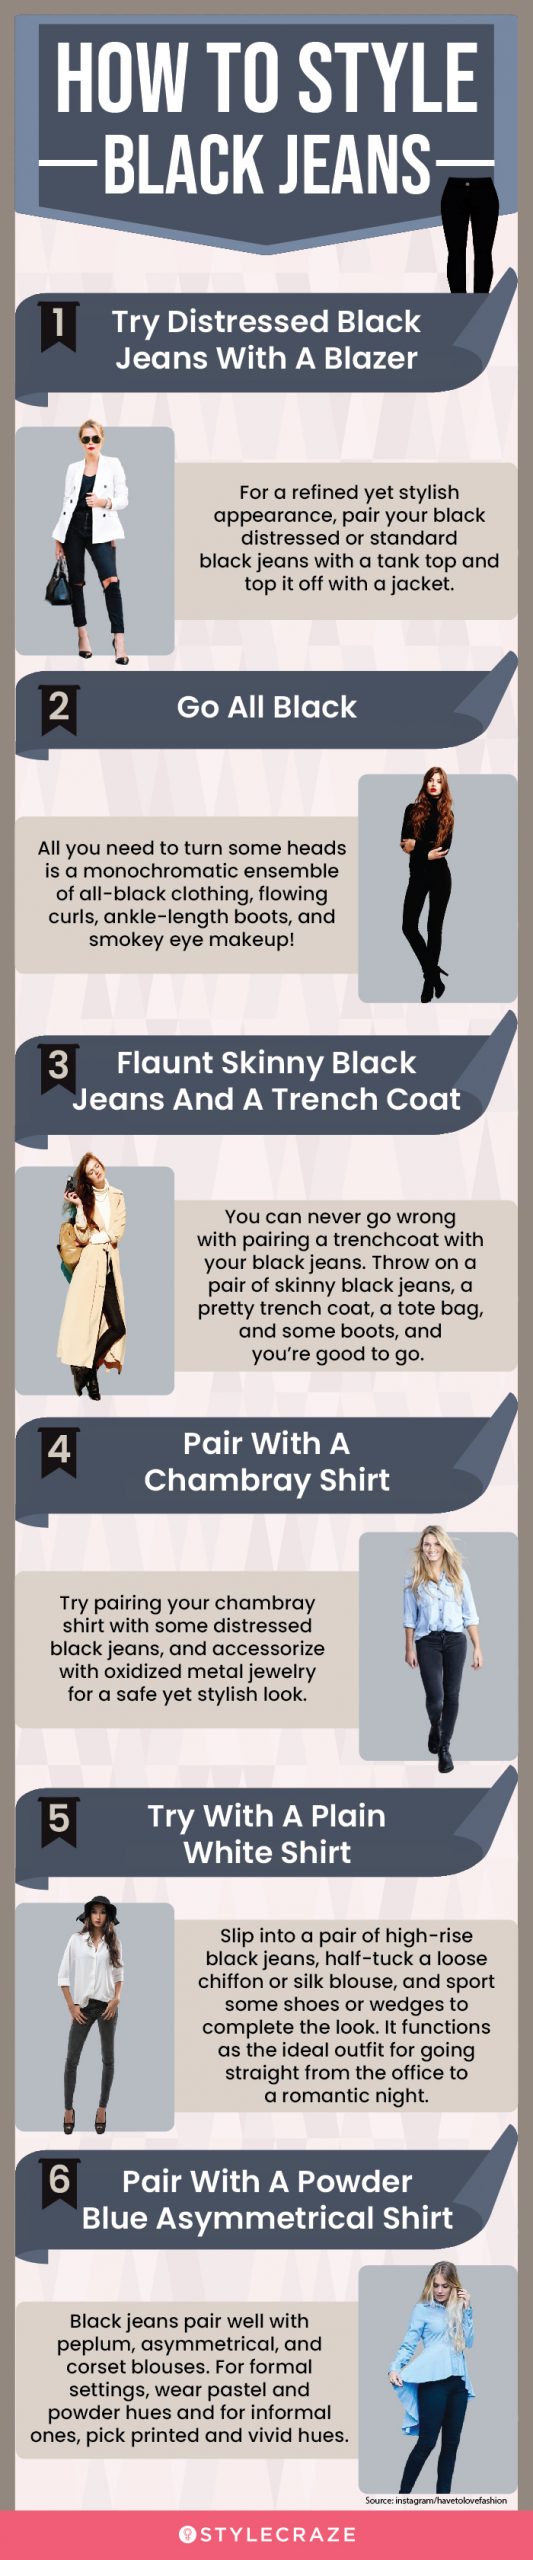 how to style black jeans (infographic)